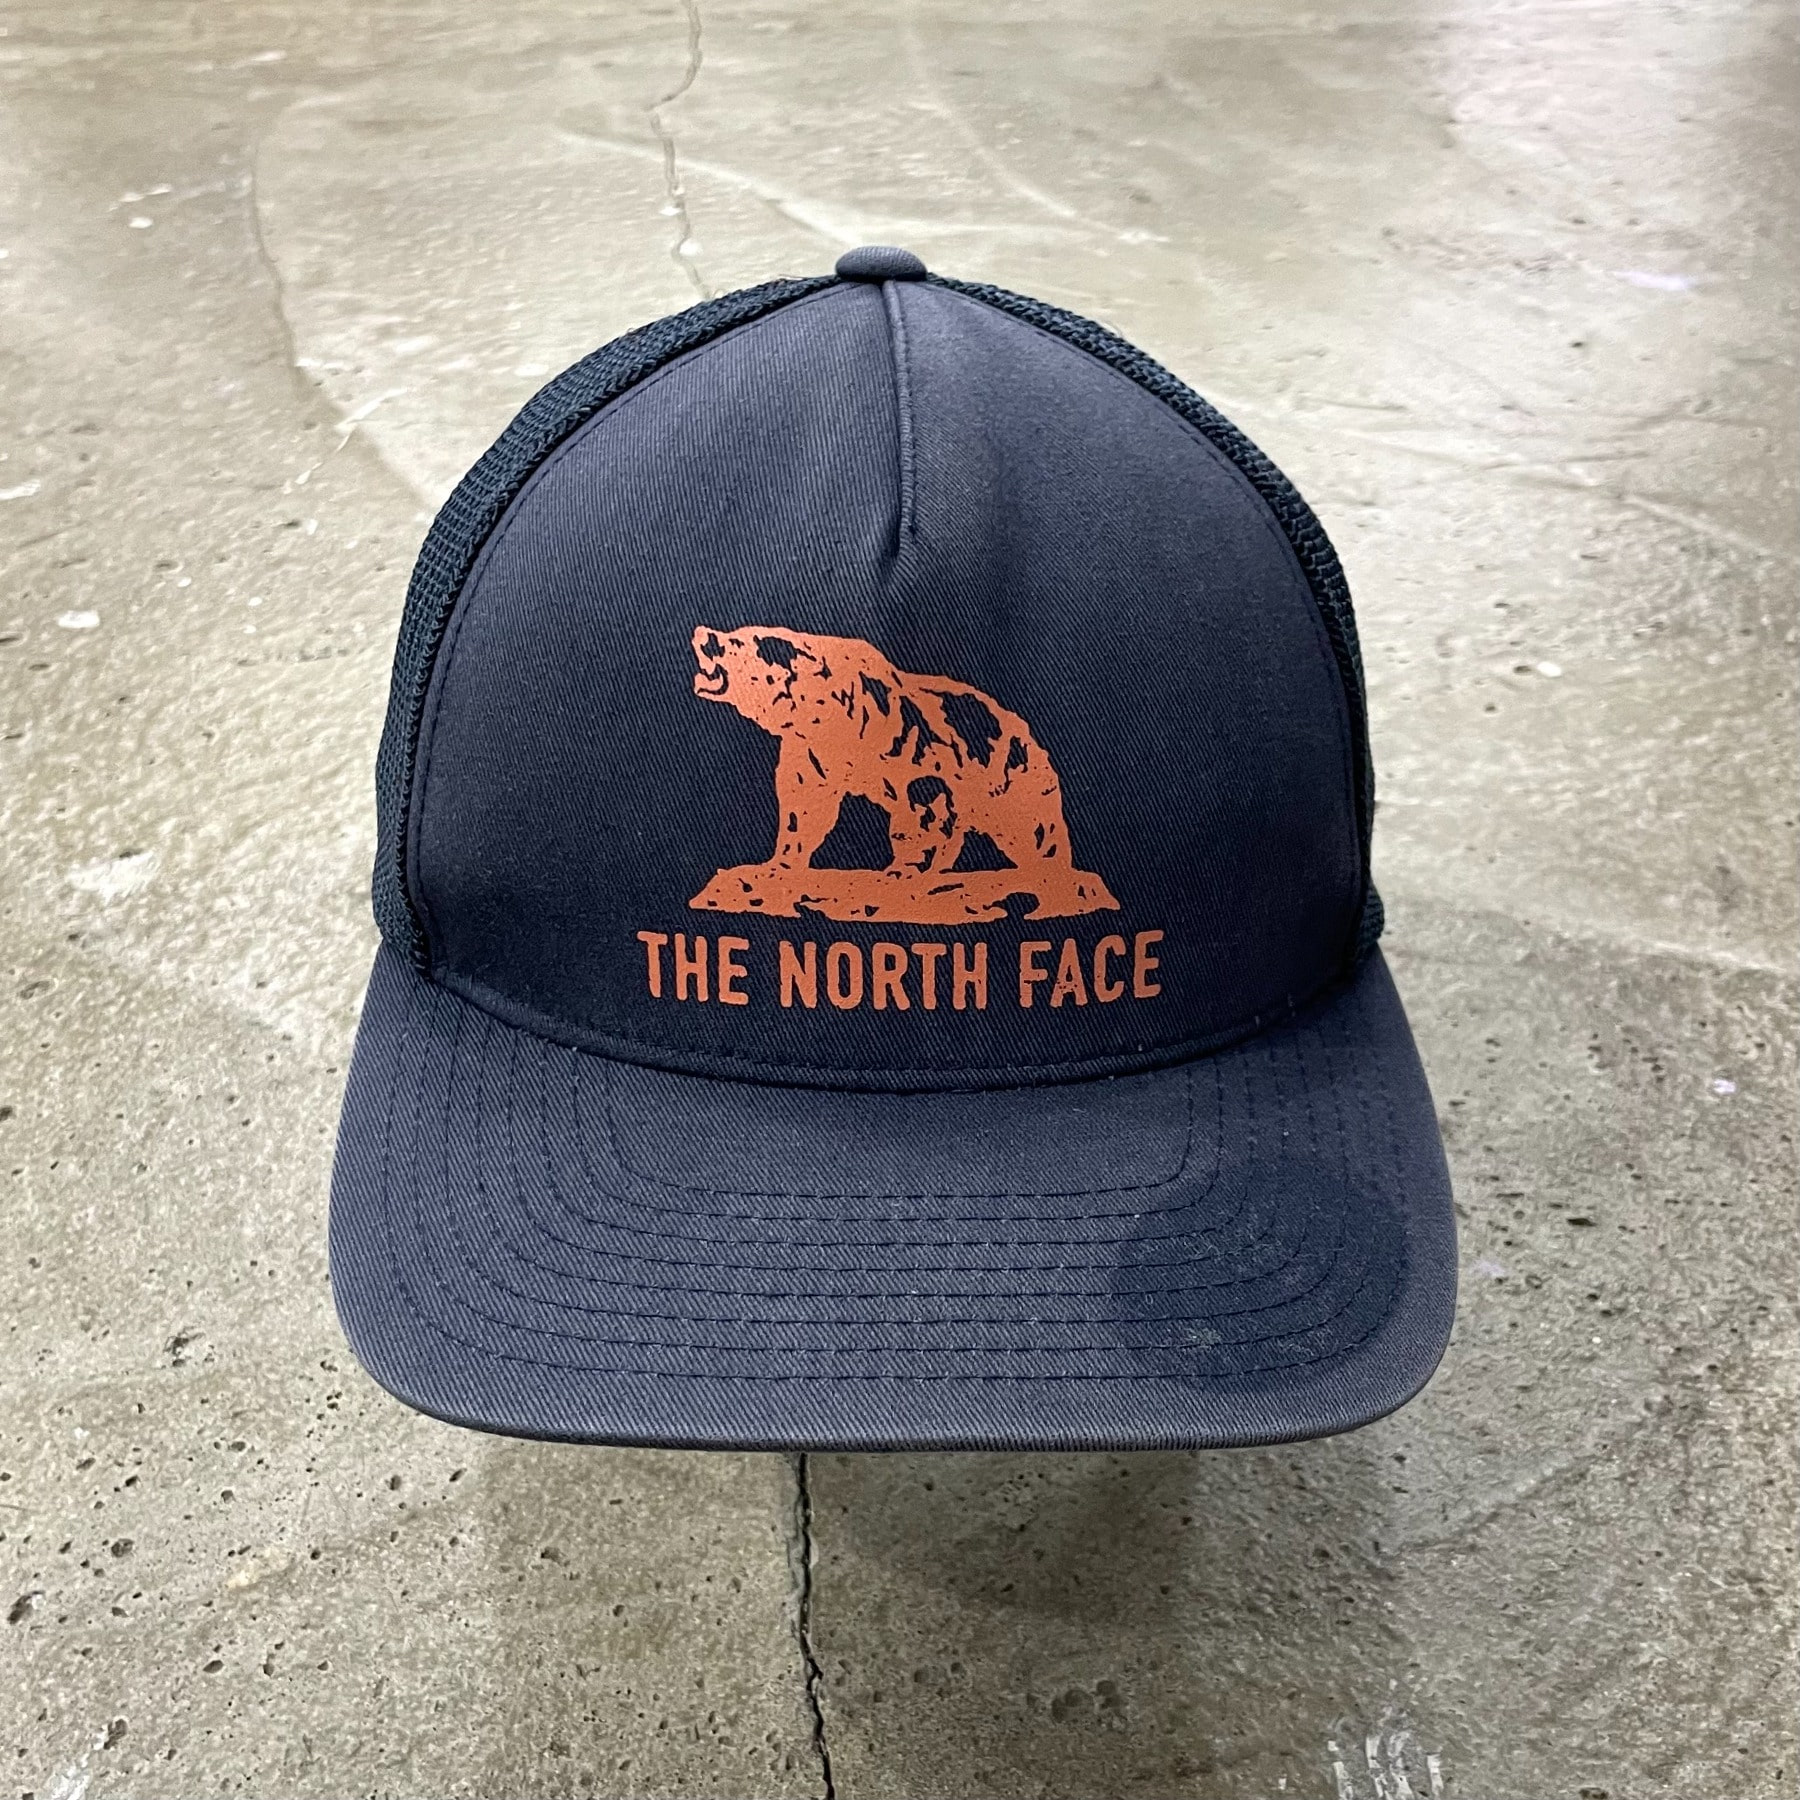 The North Face Trucker Hat